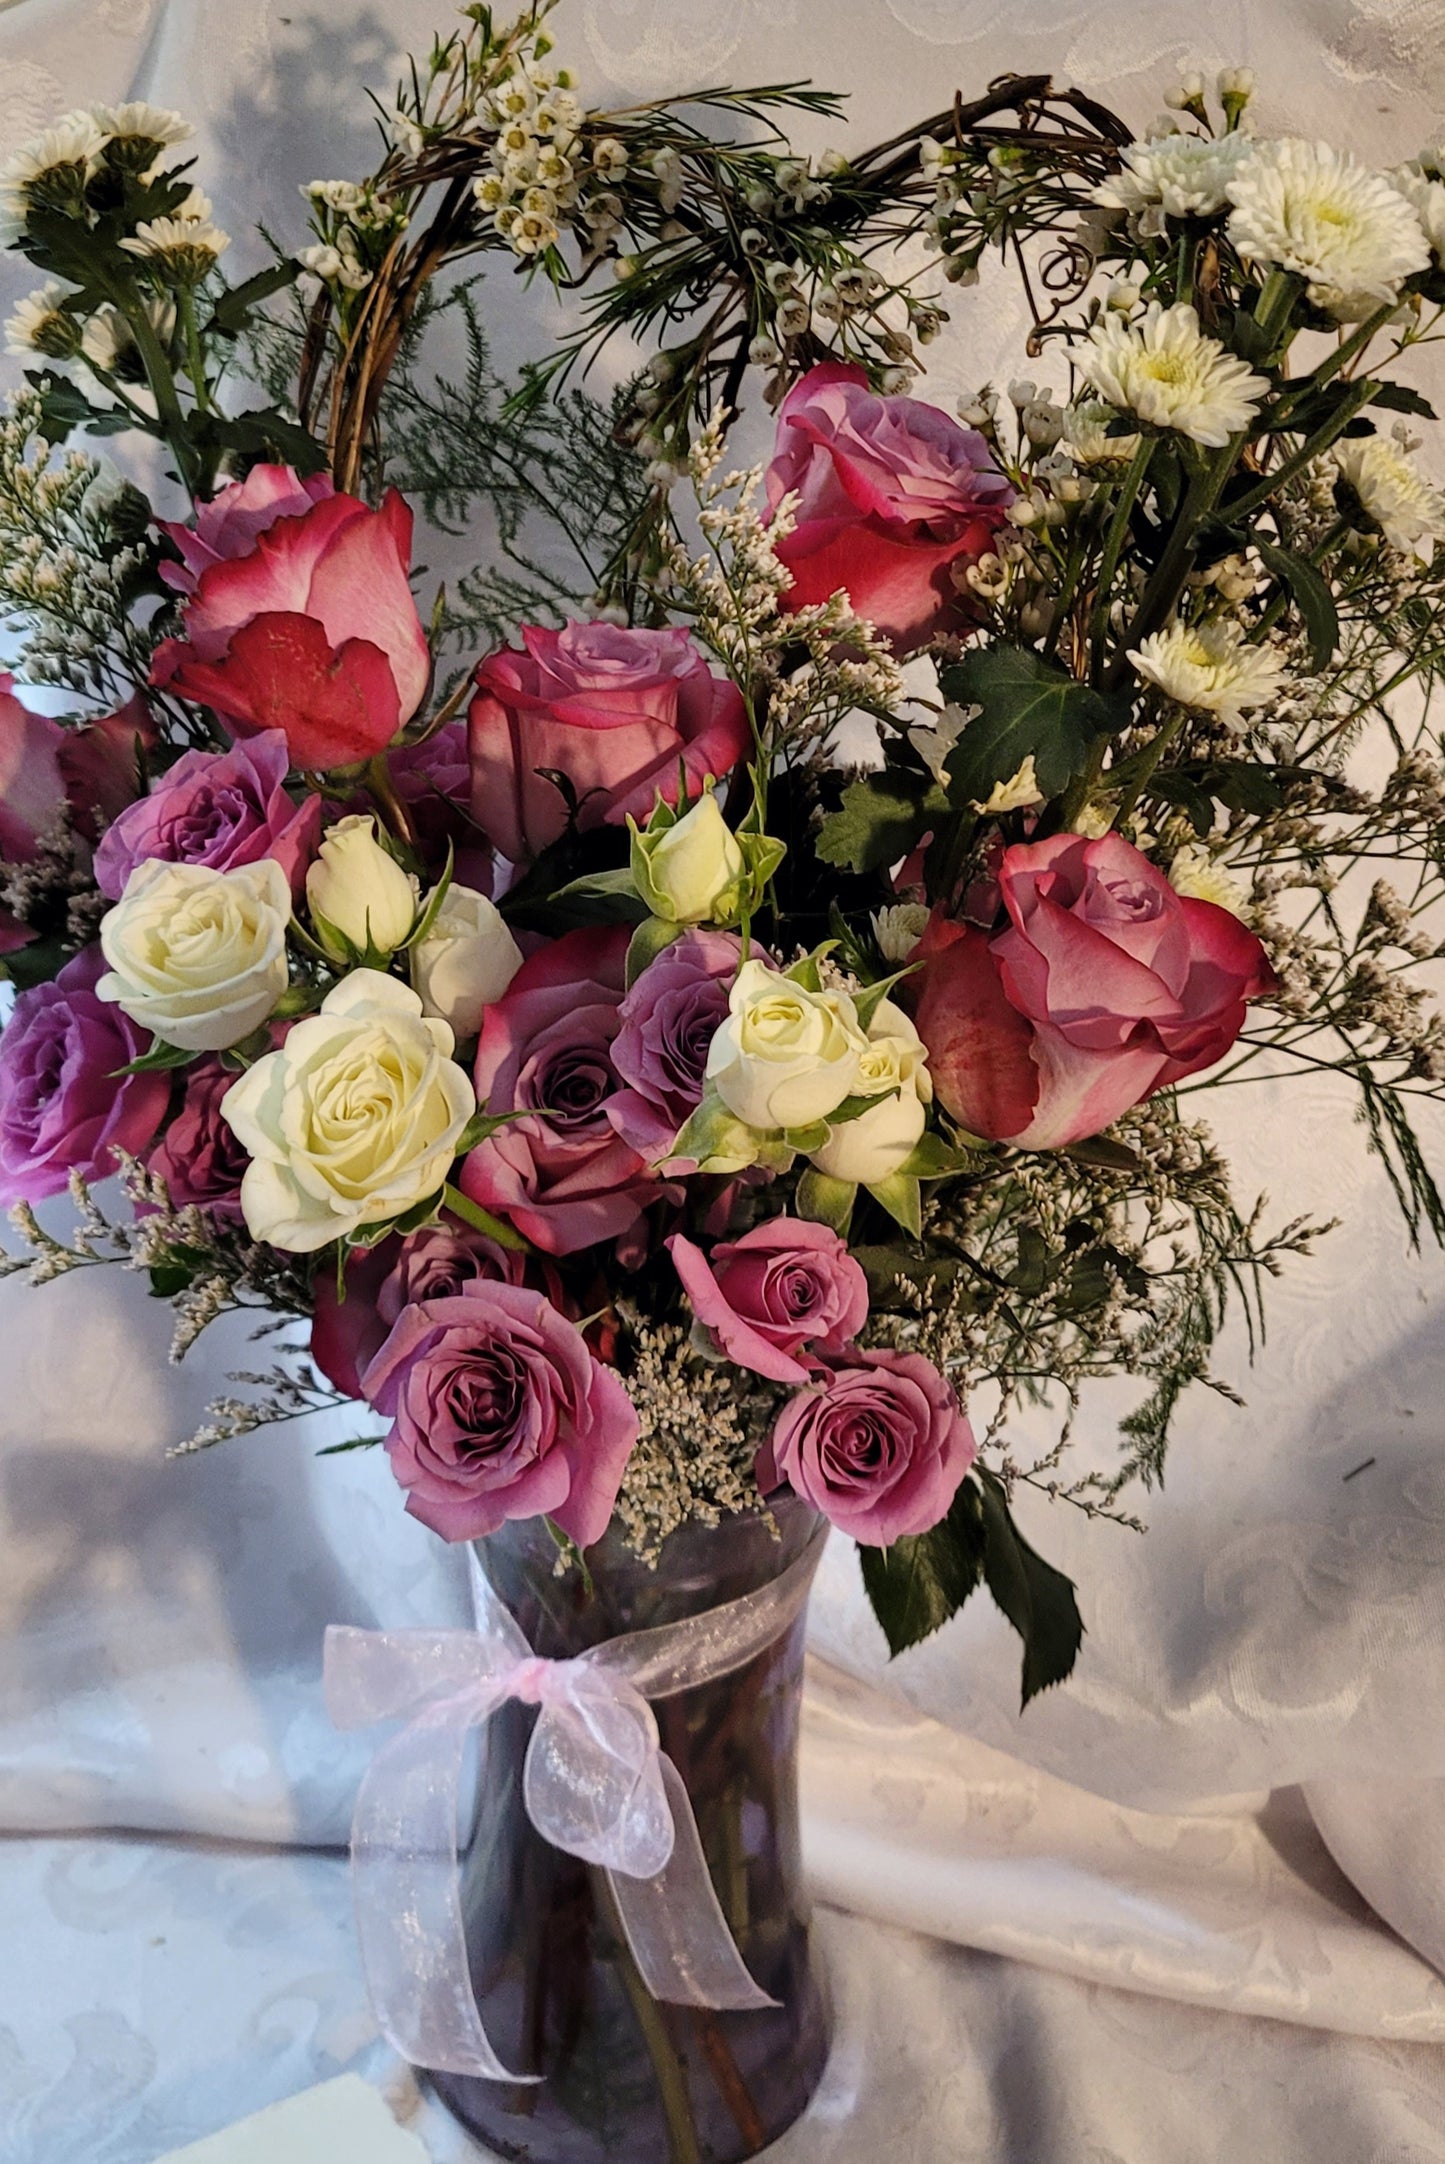 For My One and Only: The Ultimate Valentine's Bouquet in Lavender/Pink!